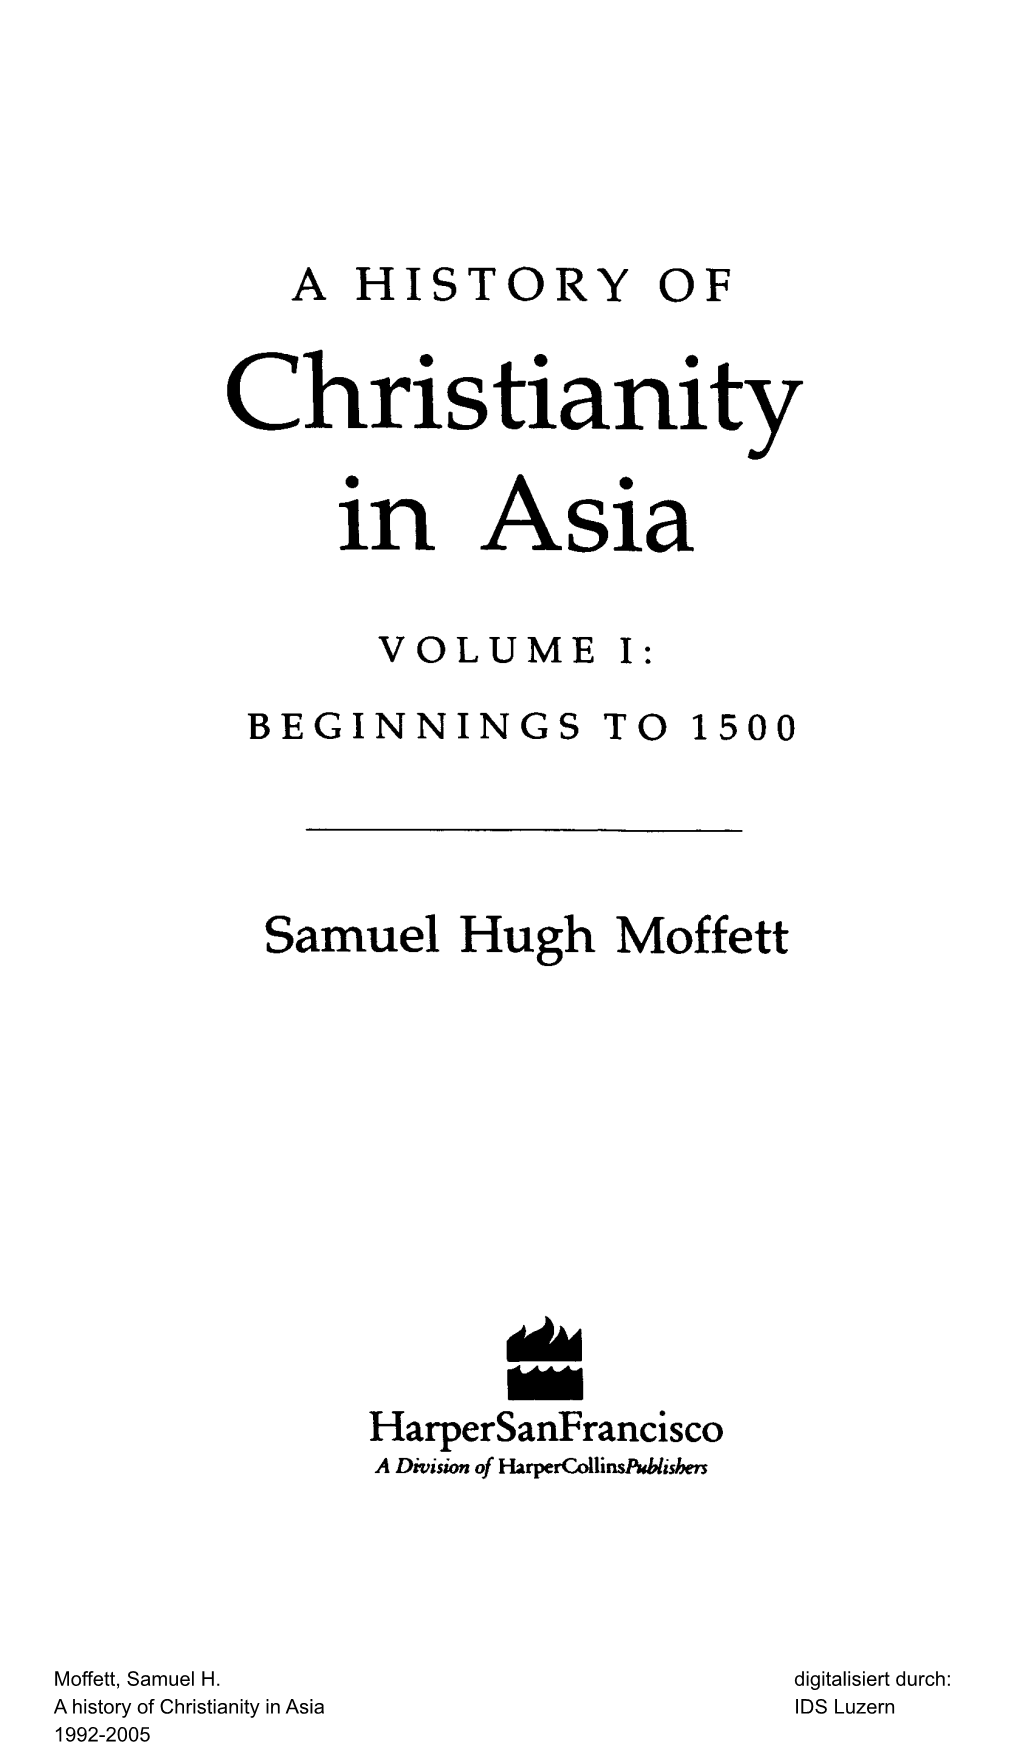 A HISTORY of Christianity in Asia